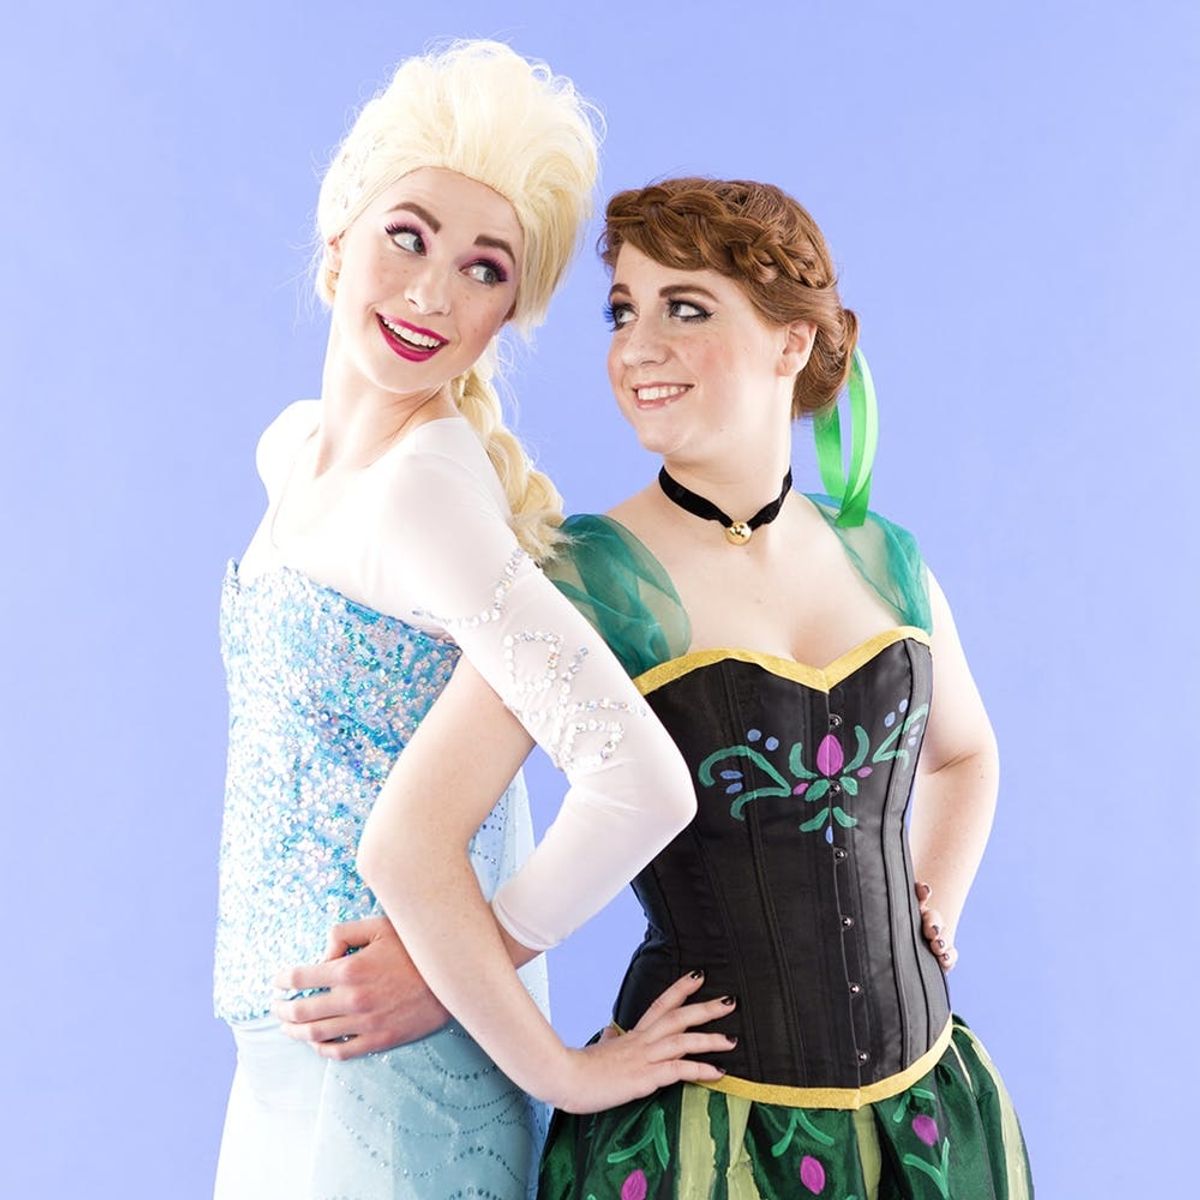 Unleash Your Frozen Fever by Wearing This Anna and Elsa BFF Costume for Halloween